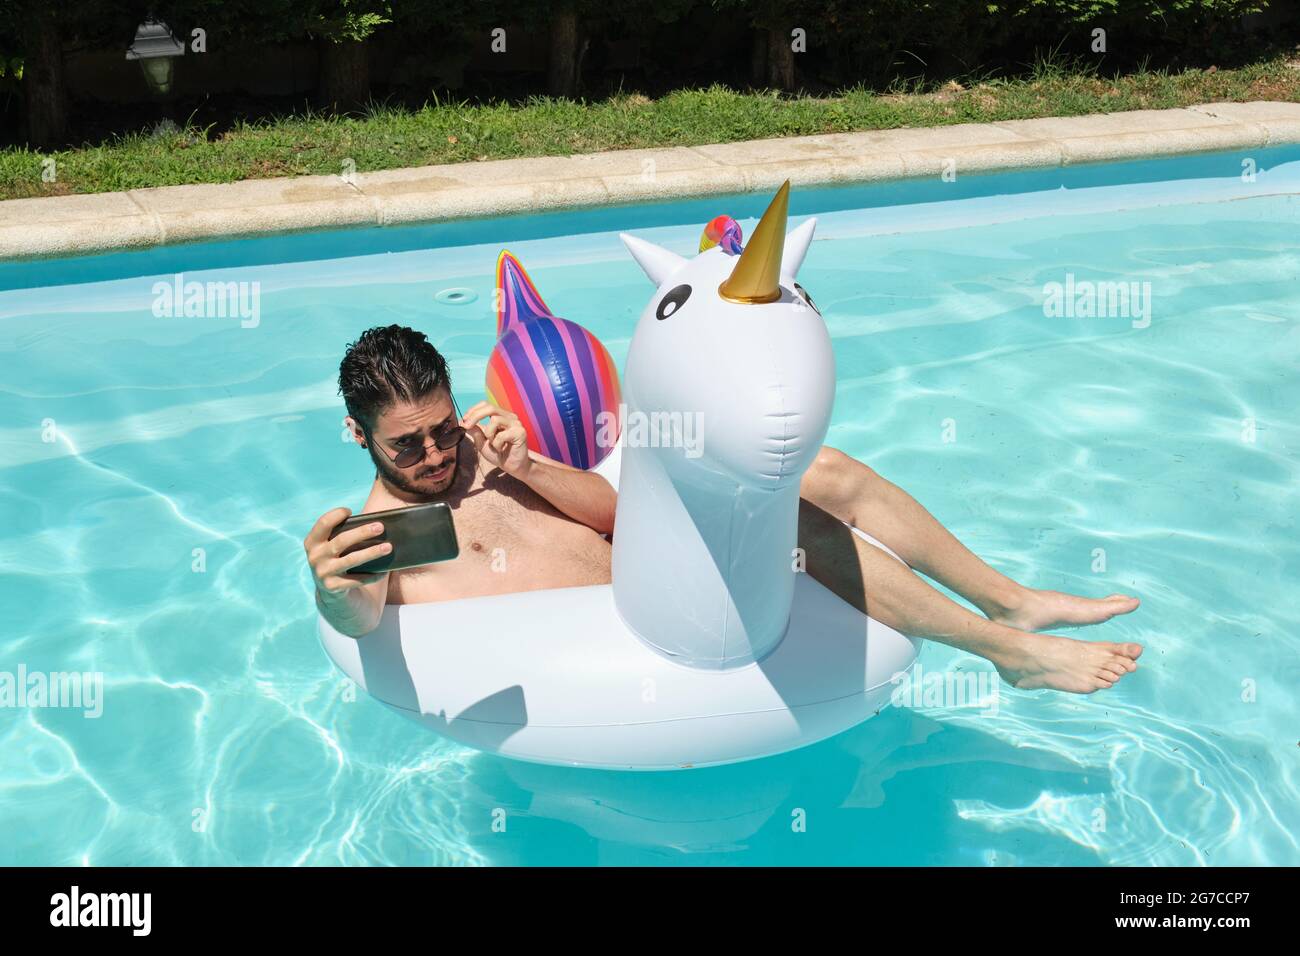 Young man wearing sunglasses taking a selfie on a unicorn inflatable ring in a swimming pool. Summer concept. Stock Photo